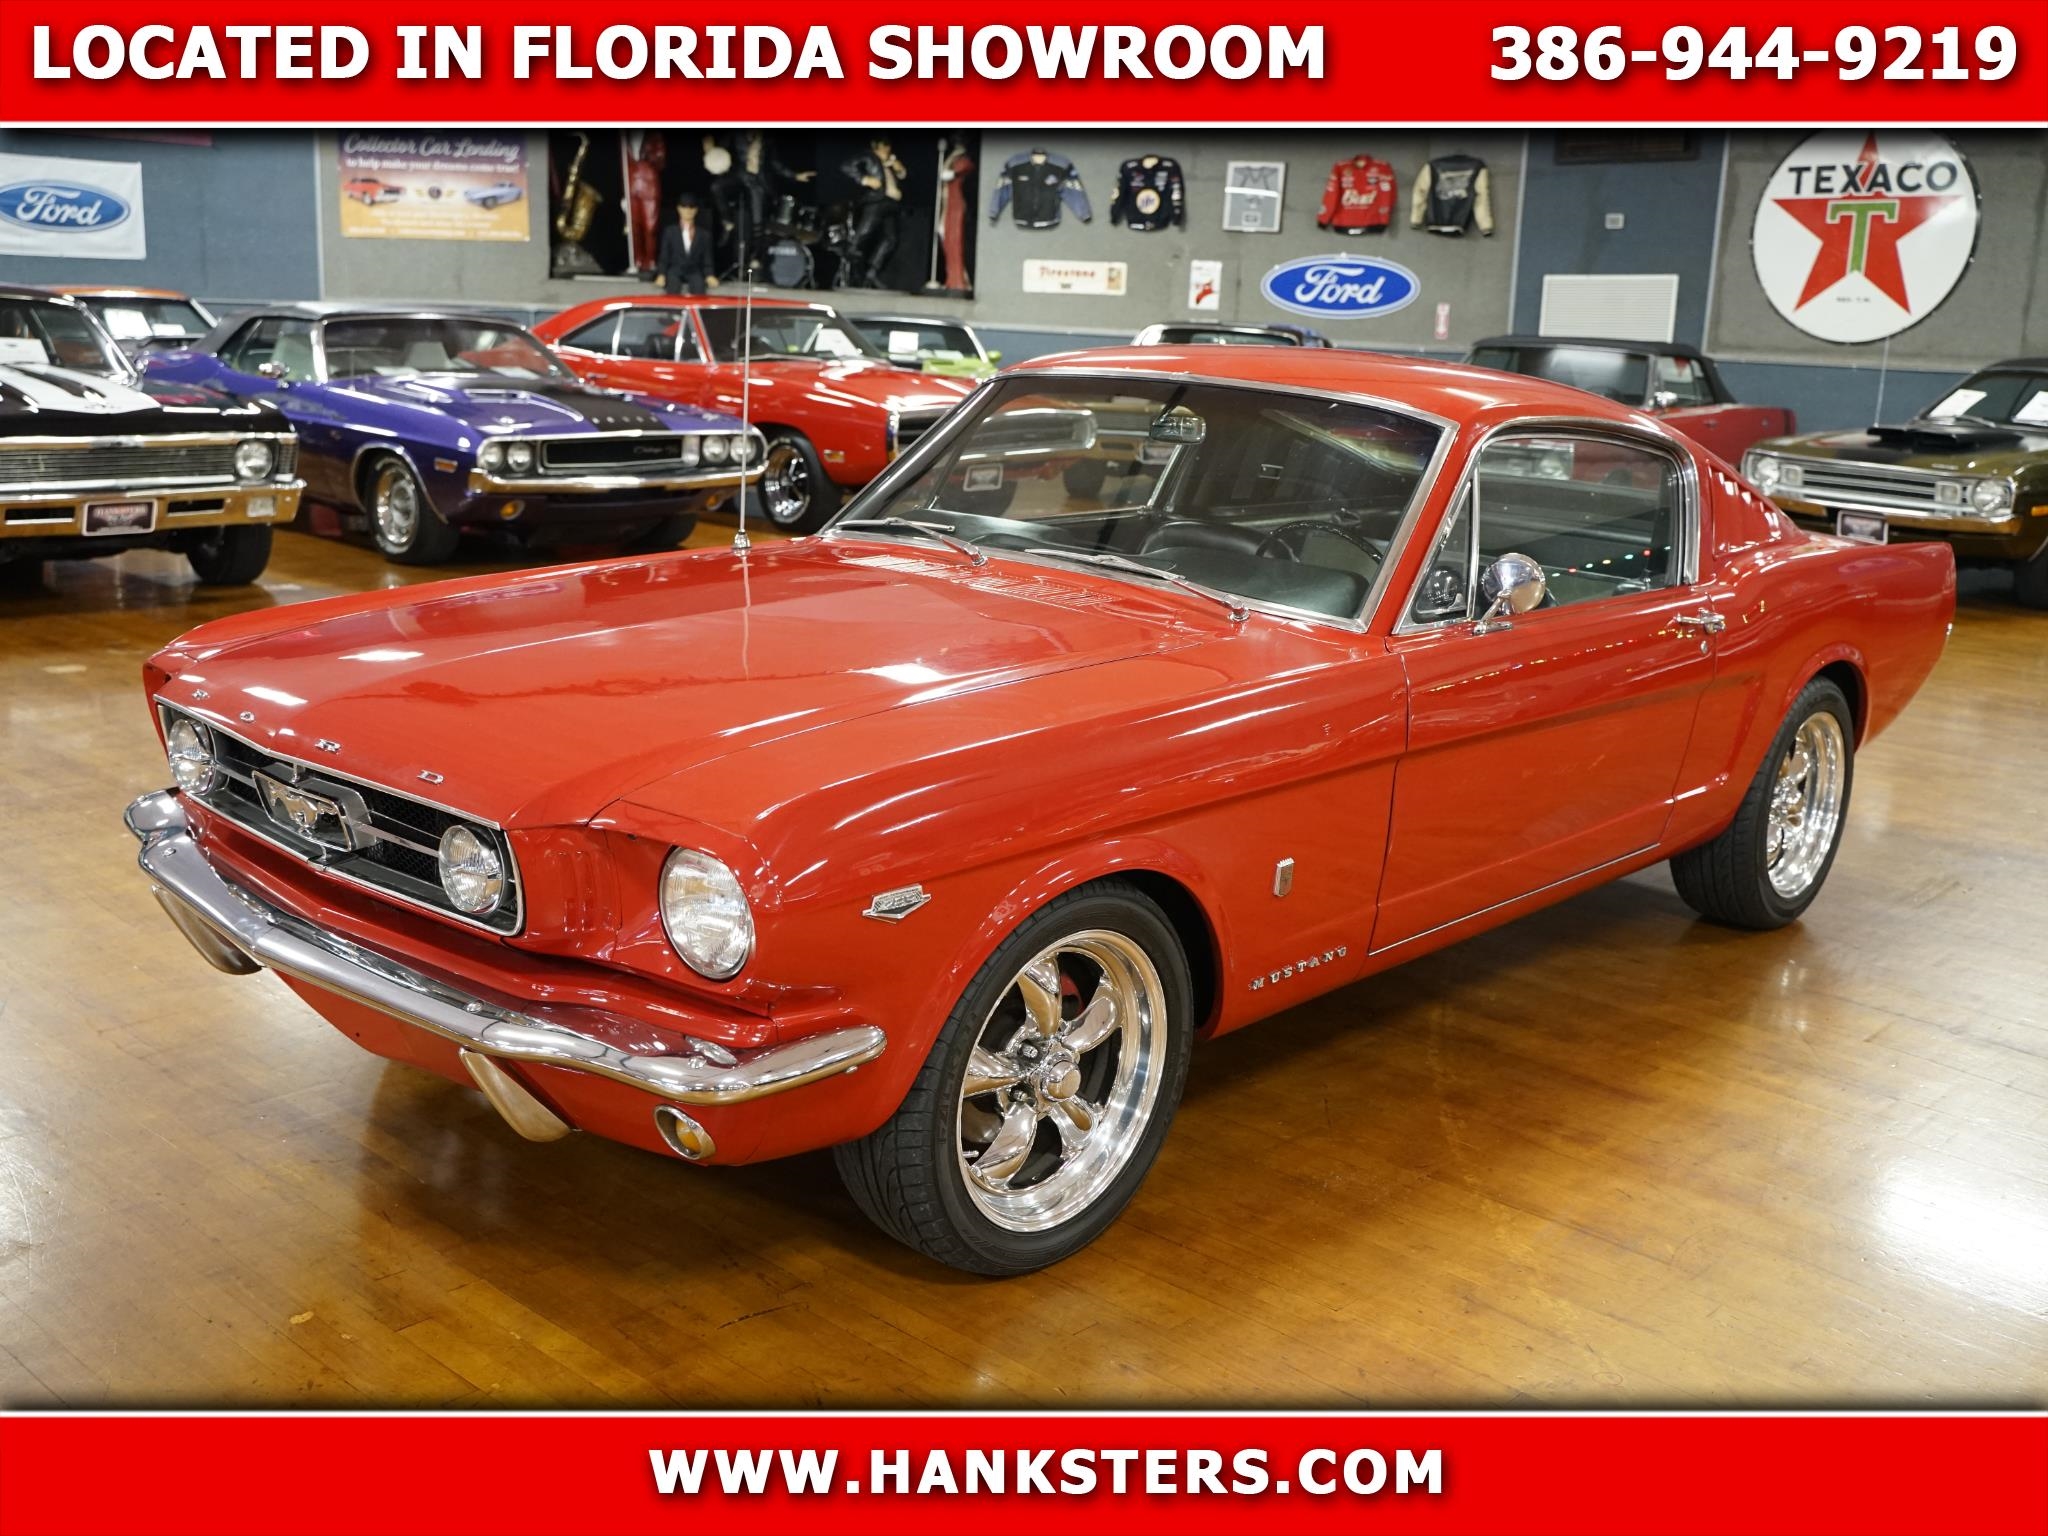 Details About 1965 Ford Mustang